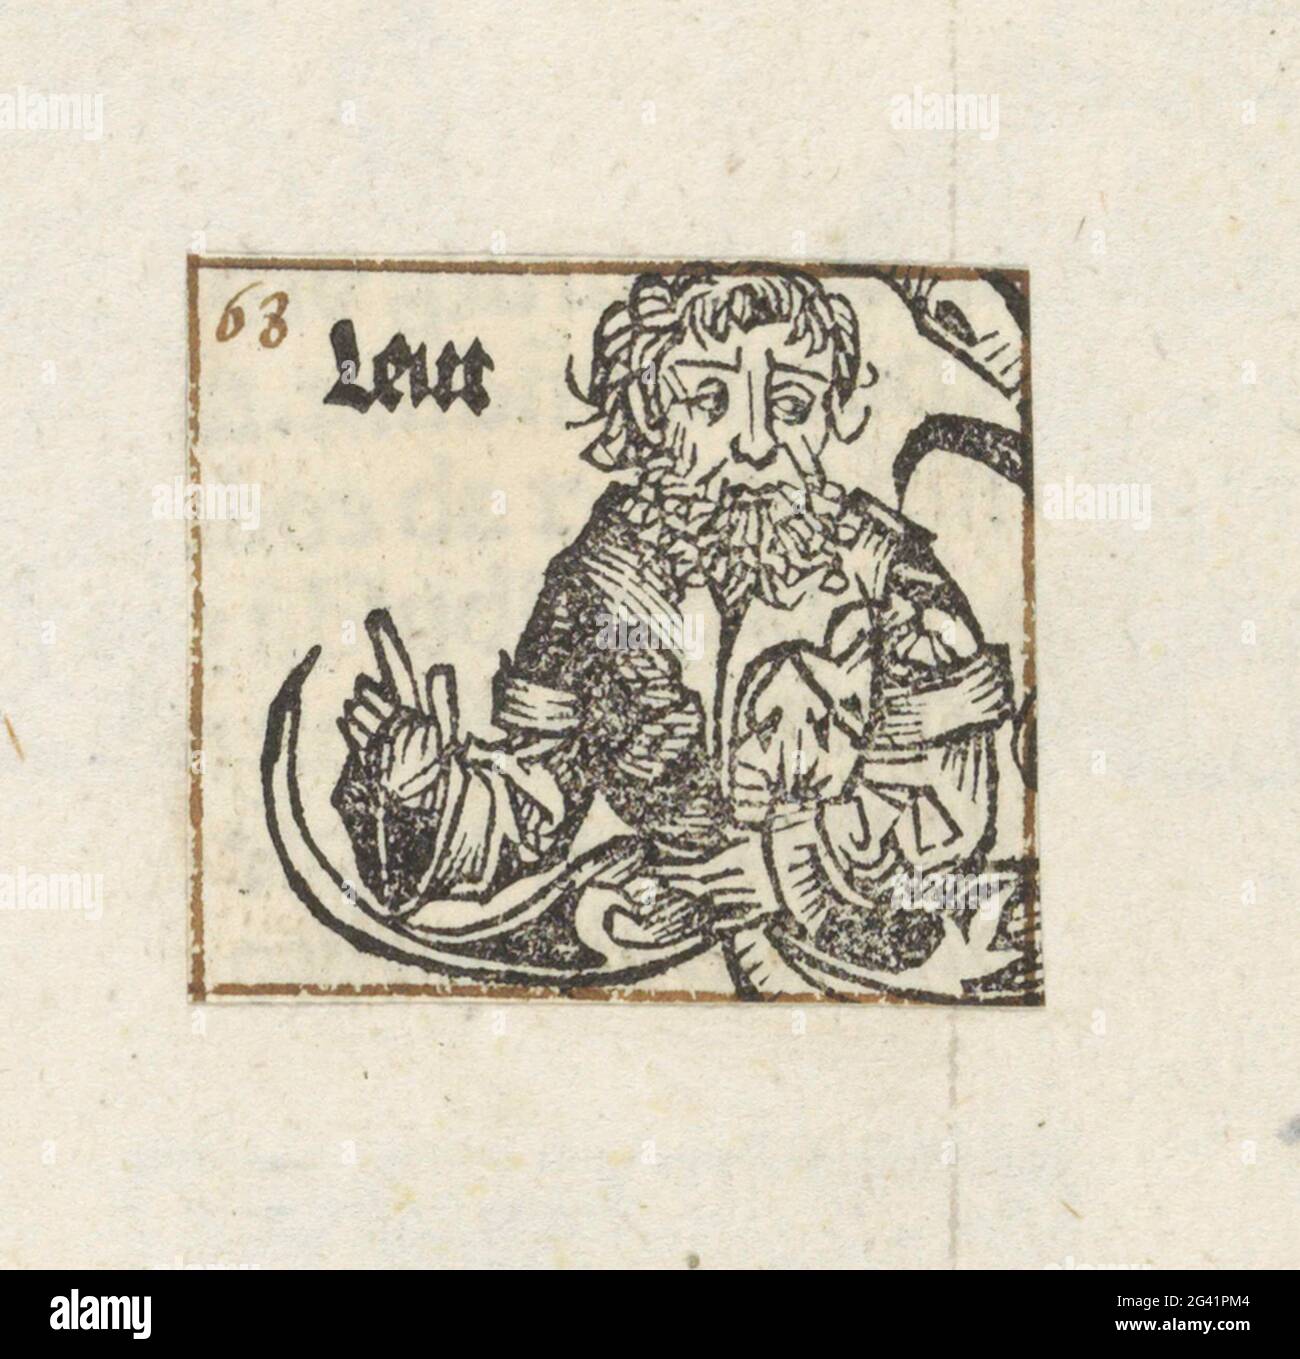 Levi; Leui; Liber chronicarum. A flower celk with a man, looking to the right and with finger charged. The text identifies him as Levi, the third son of Jacob and Lea. The show is a fragment of the family tree of Christ in the Liber Chronicarum. The print is part of an album. Stock Photo